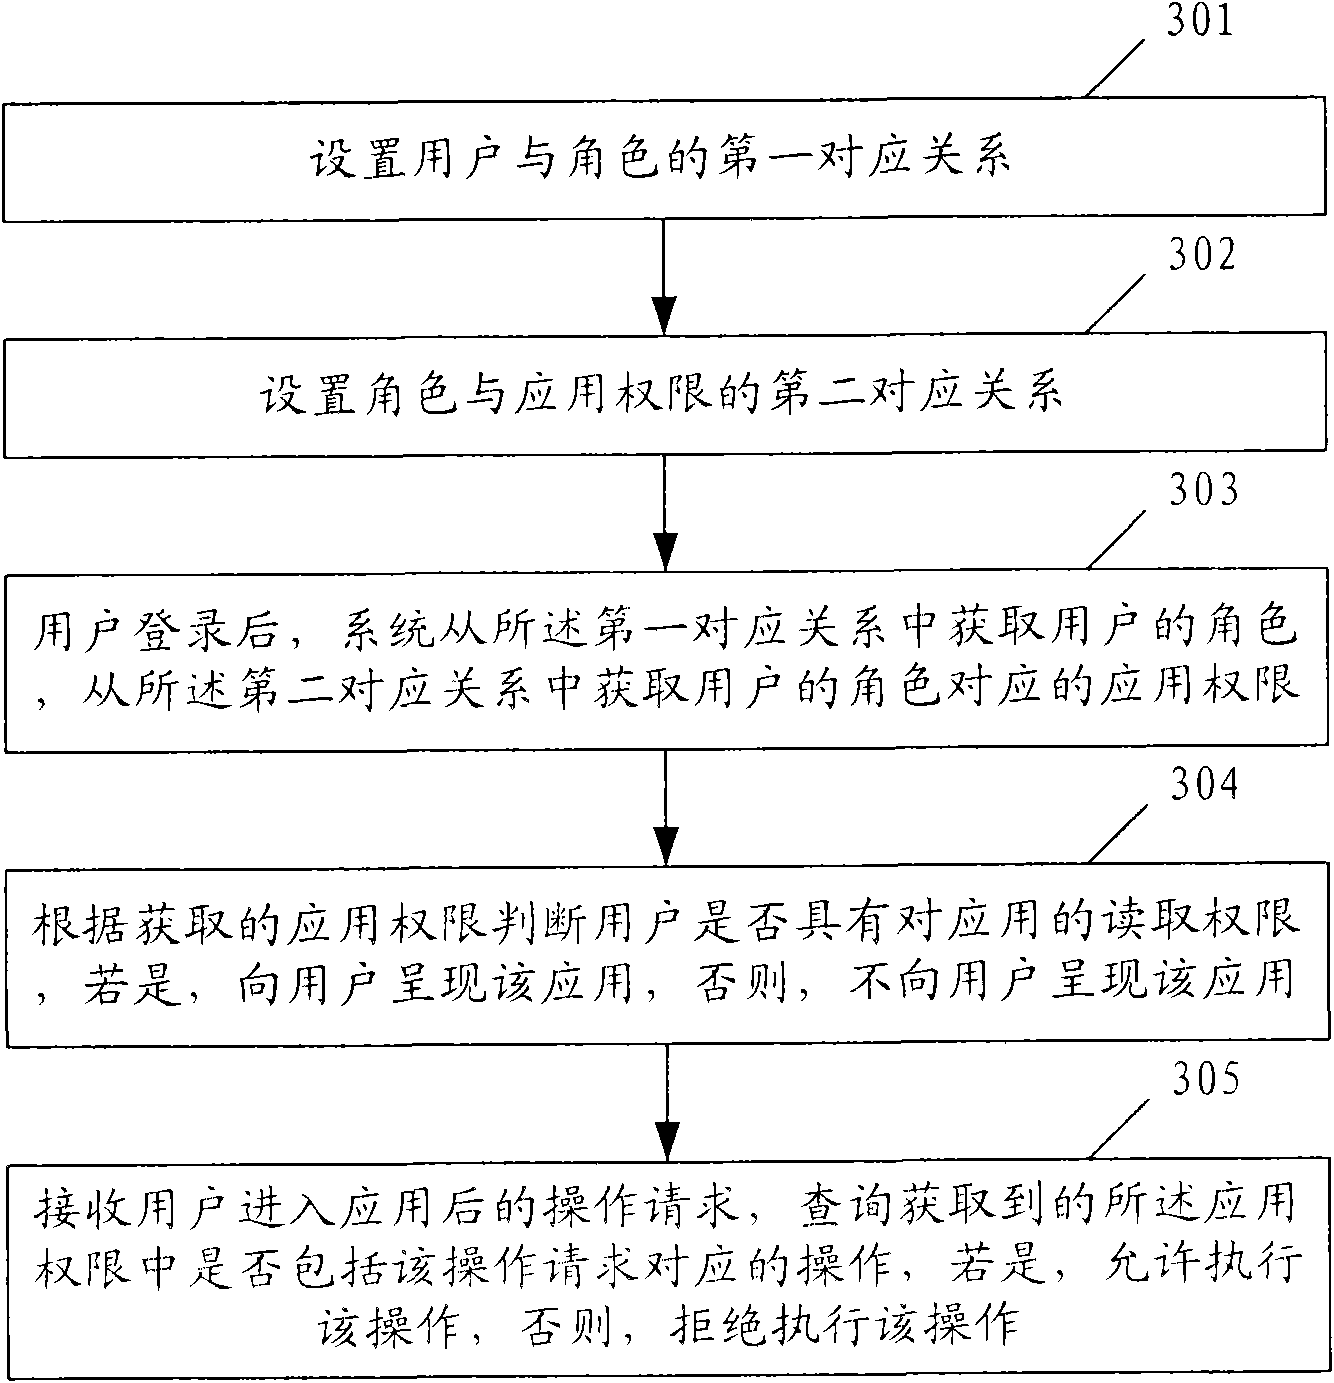 Method and device for controlling permission